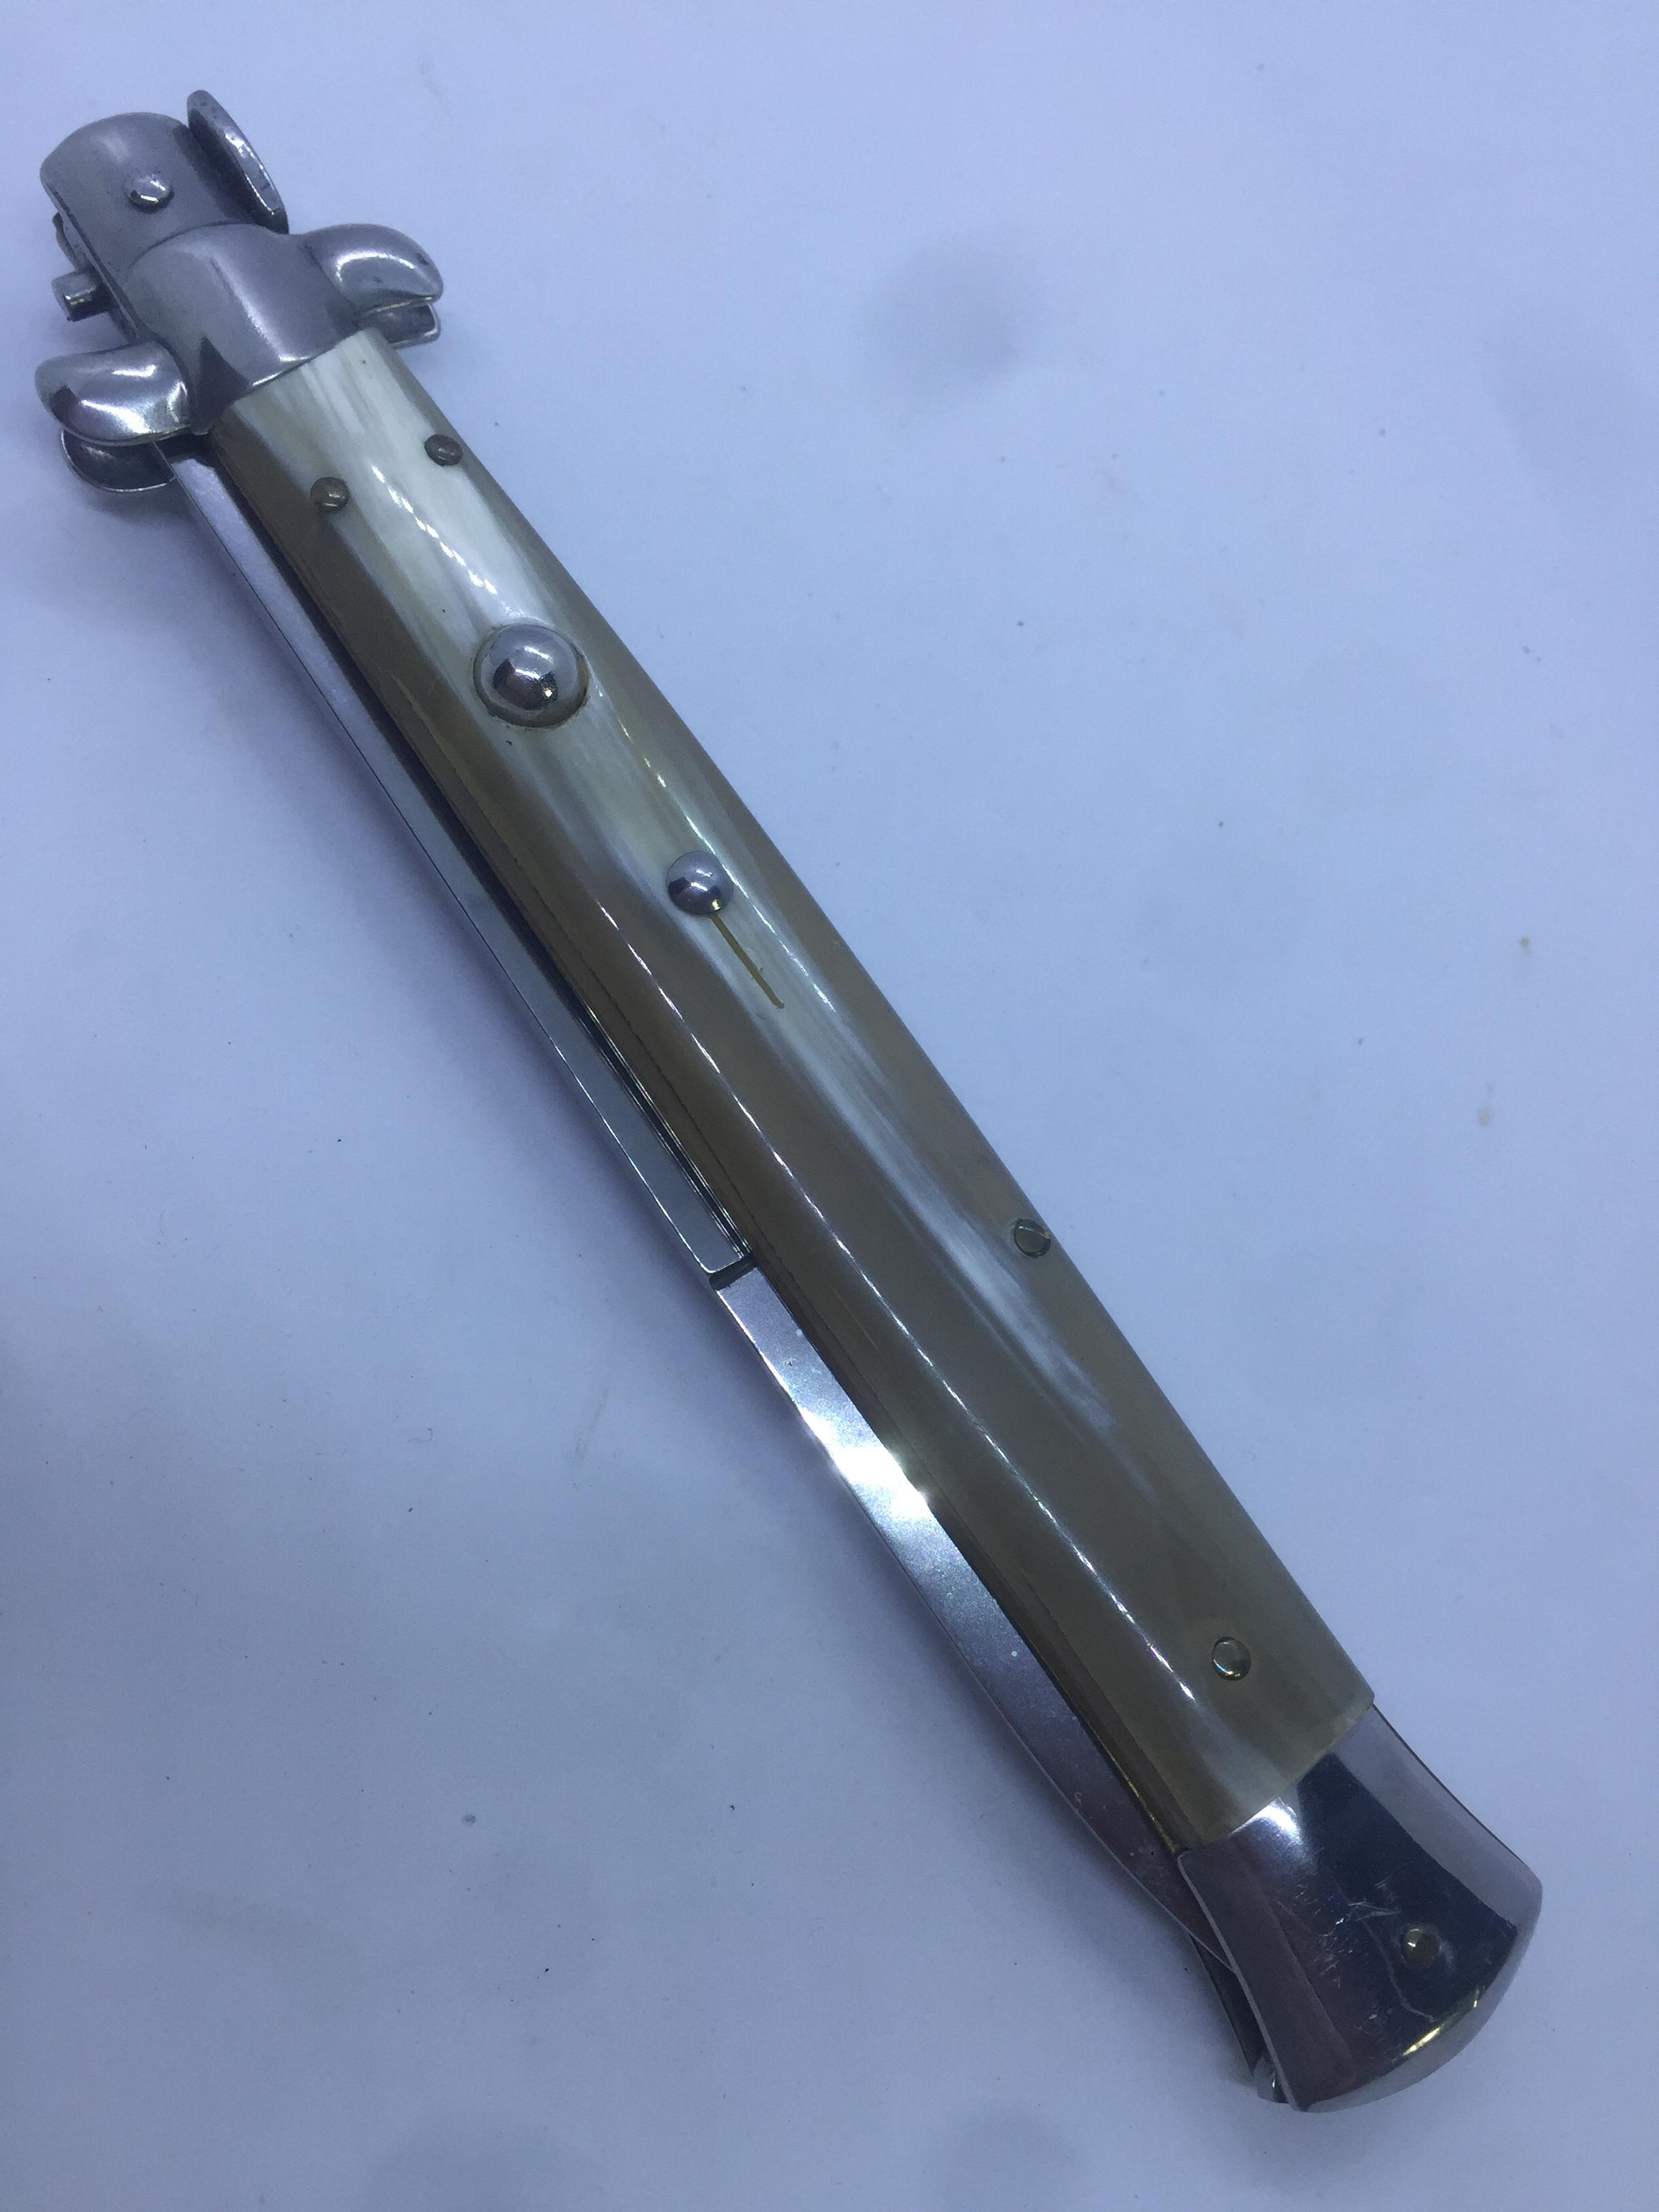 13" AKC ITALY SWITCHBLADE HORN AUTOMATIC KNIFE